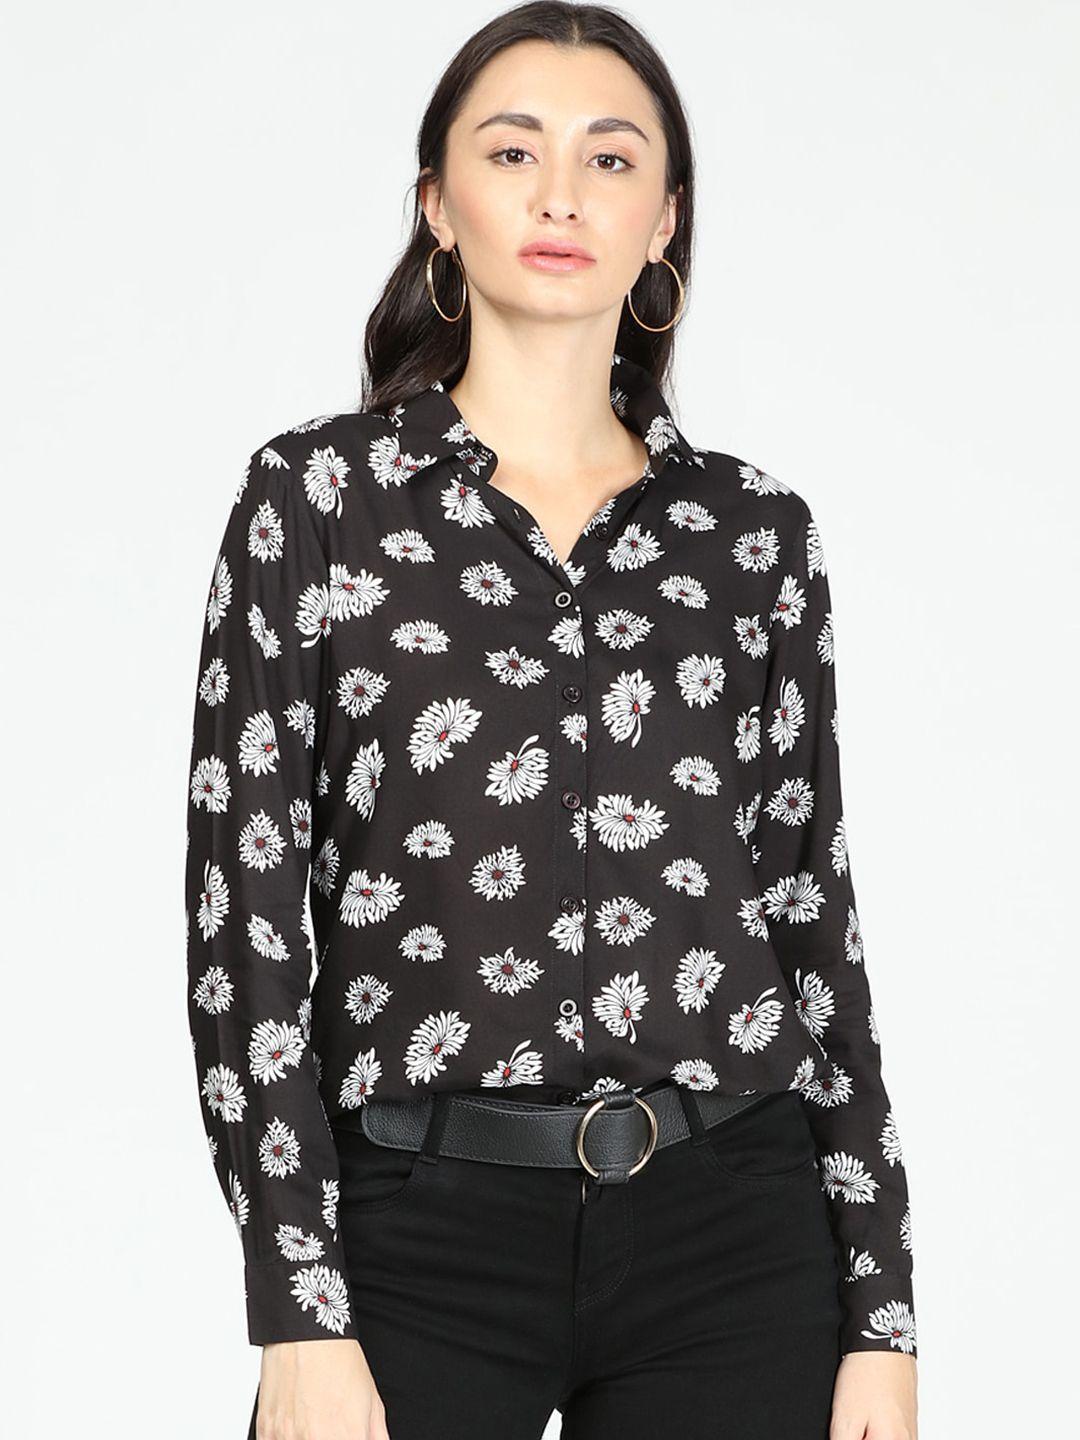 idk women black floral printed shirt style top